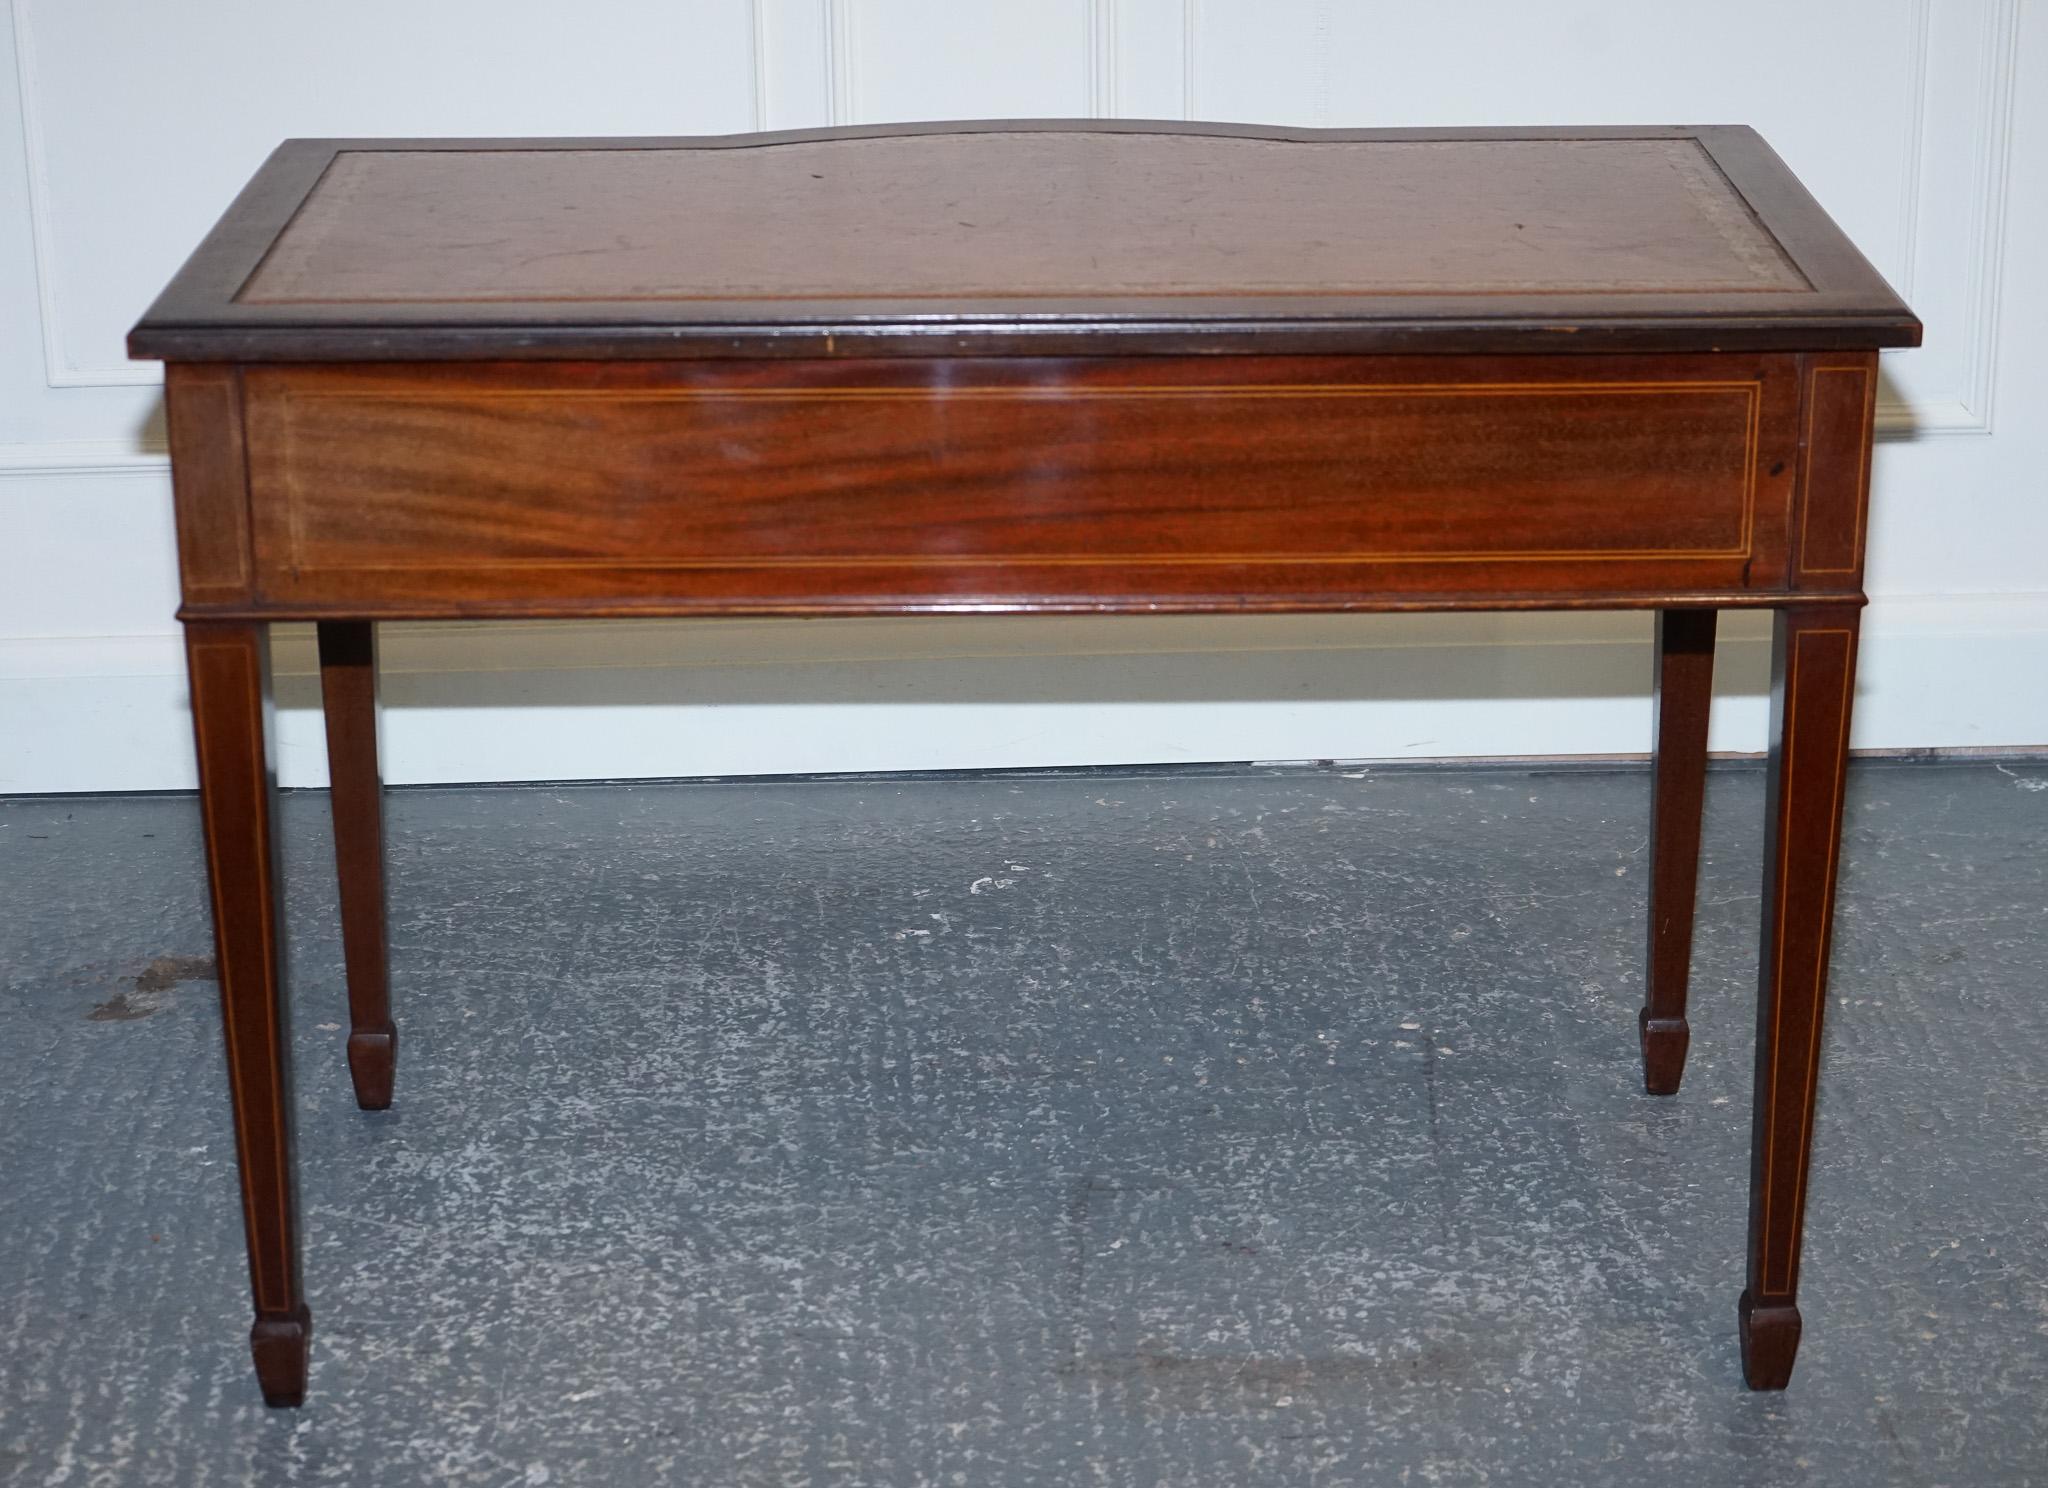 EDWARDIAN 1880er Jahre STAMPED MAPLE & CO BROWN LEATHER SHERATON WRITING DESK TABLE  im Angebot 4